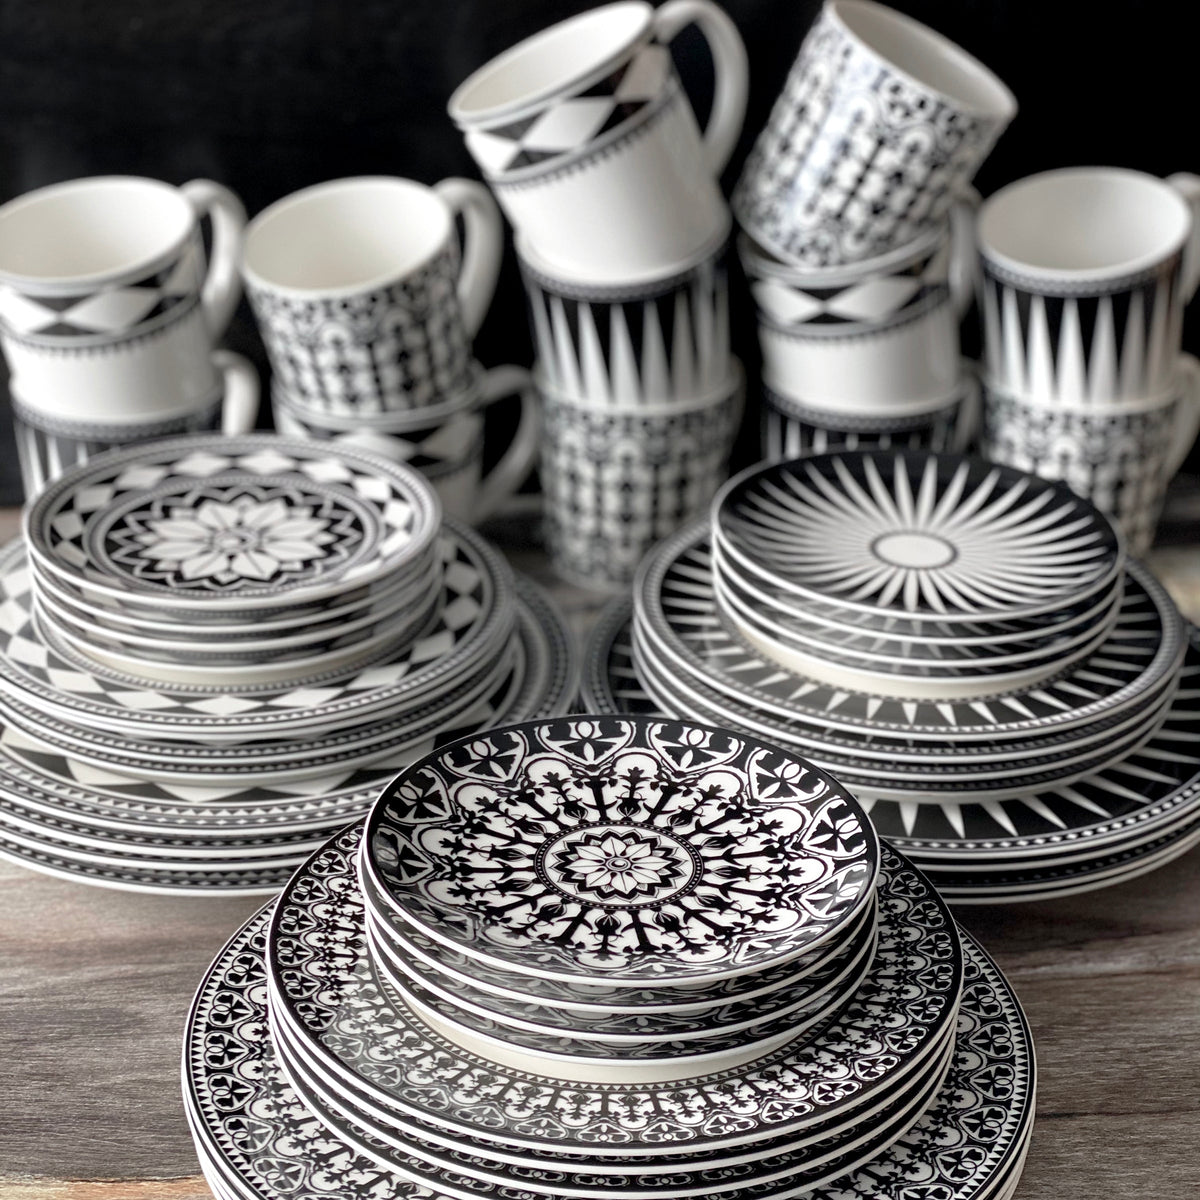 A collection of patterned black and white porcelain plates and mugs is stacked neatly on a wooden surface. The designs feature intricate geometric and floral motifs, showcasing Caskata Artisanal Home&#39;s heirloom-quality Casablanca Small Plates.